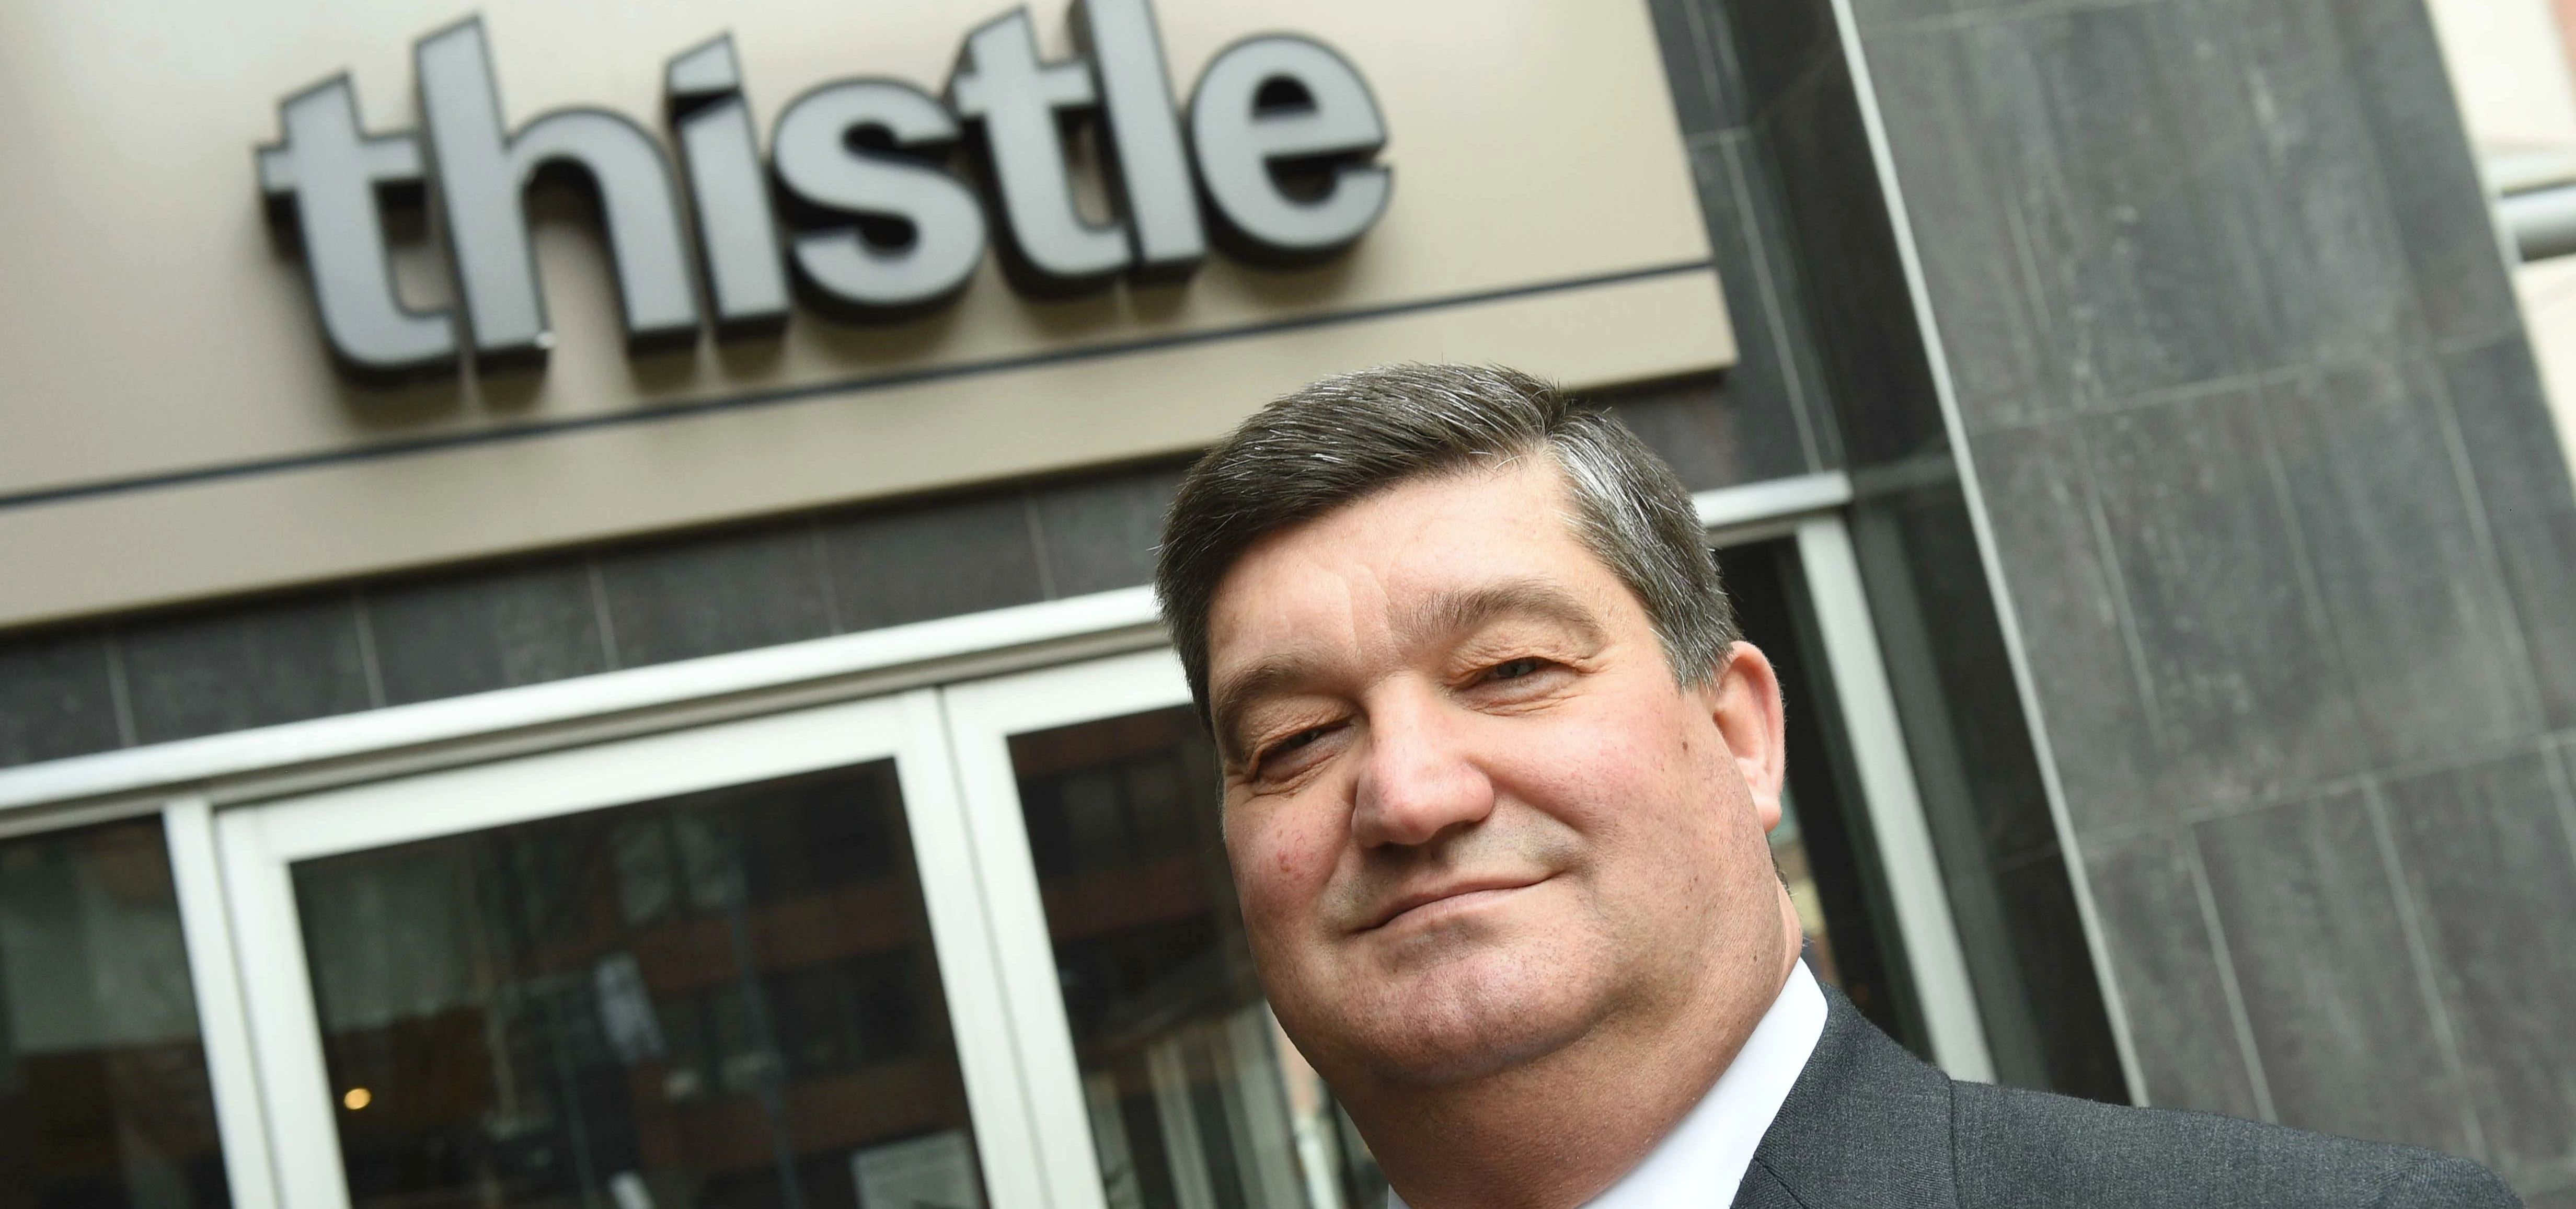 Damon Roberts, Thistle Hotel general manager